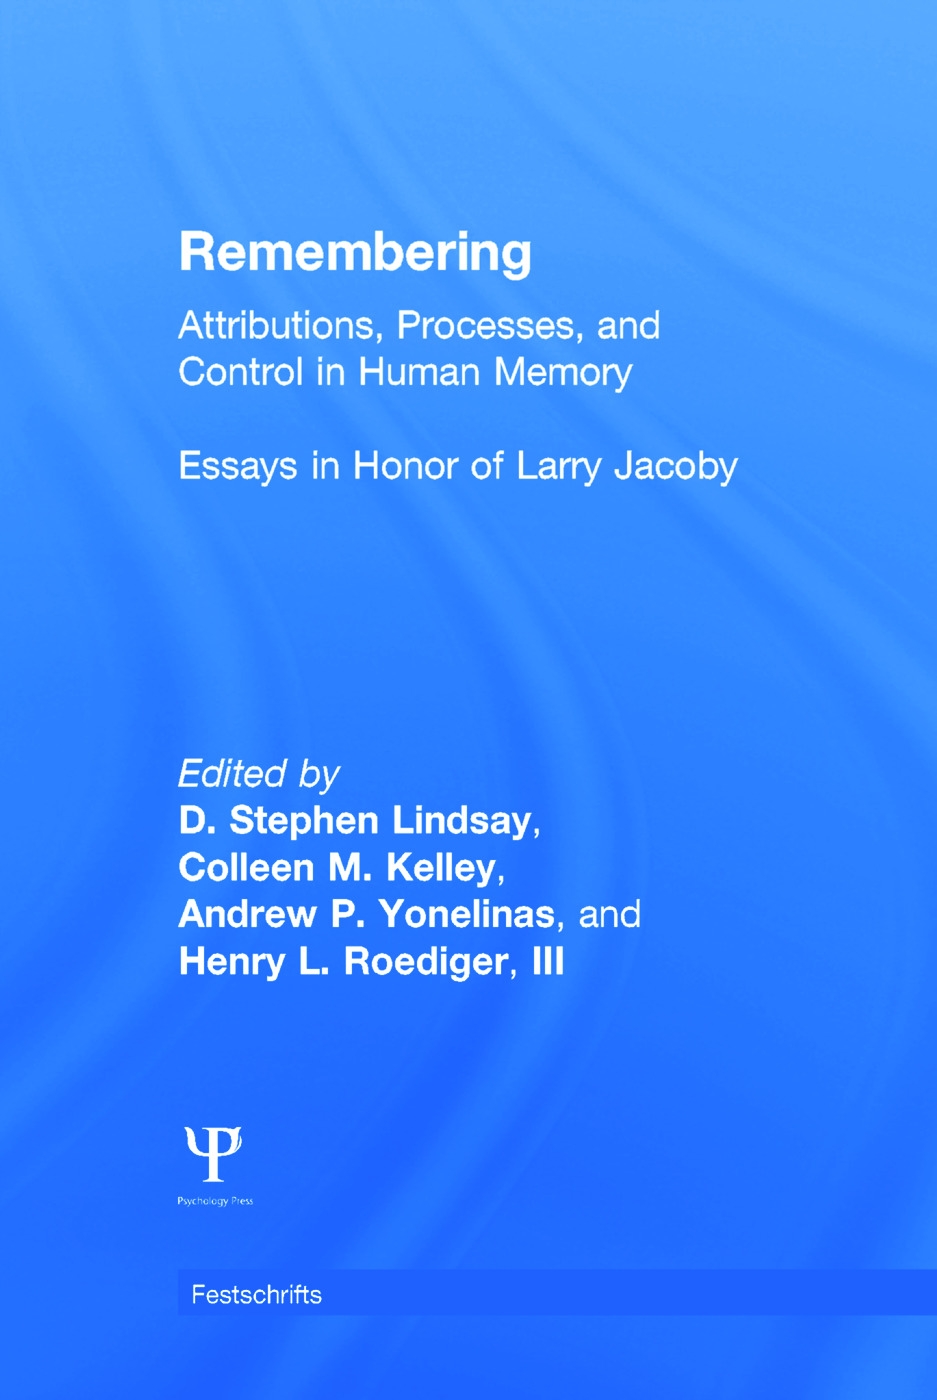 Remembering: Attributions, Processes, and Control in Human Memory